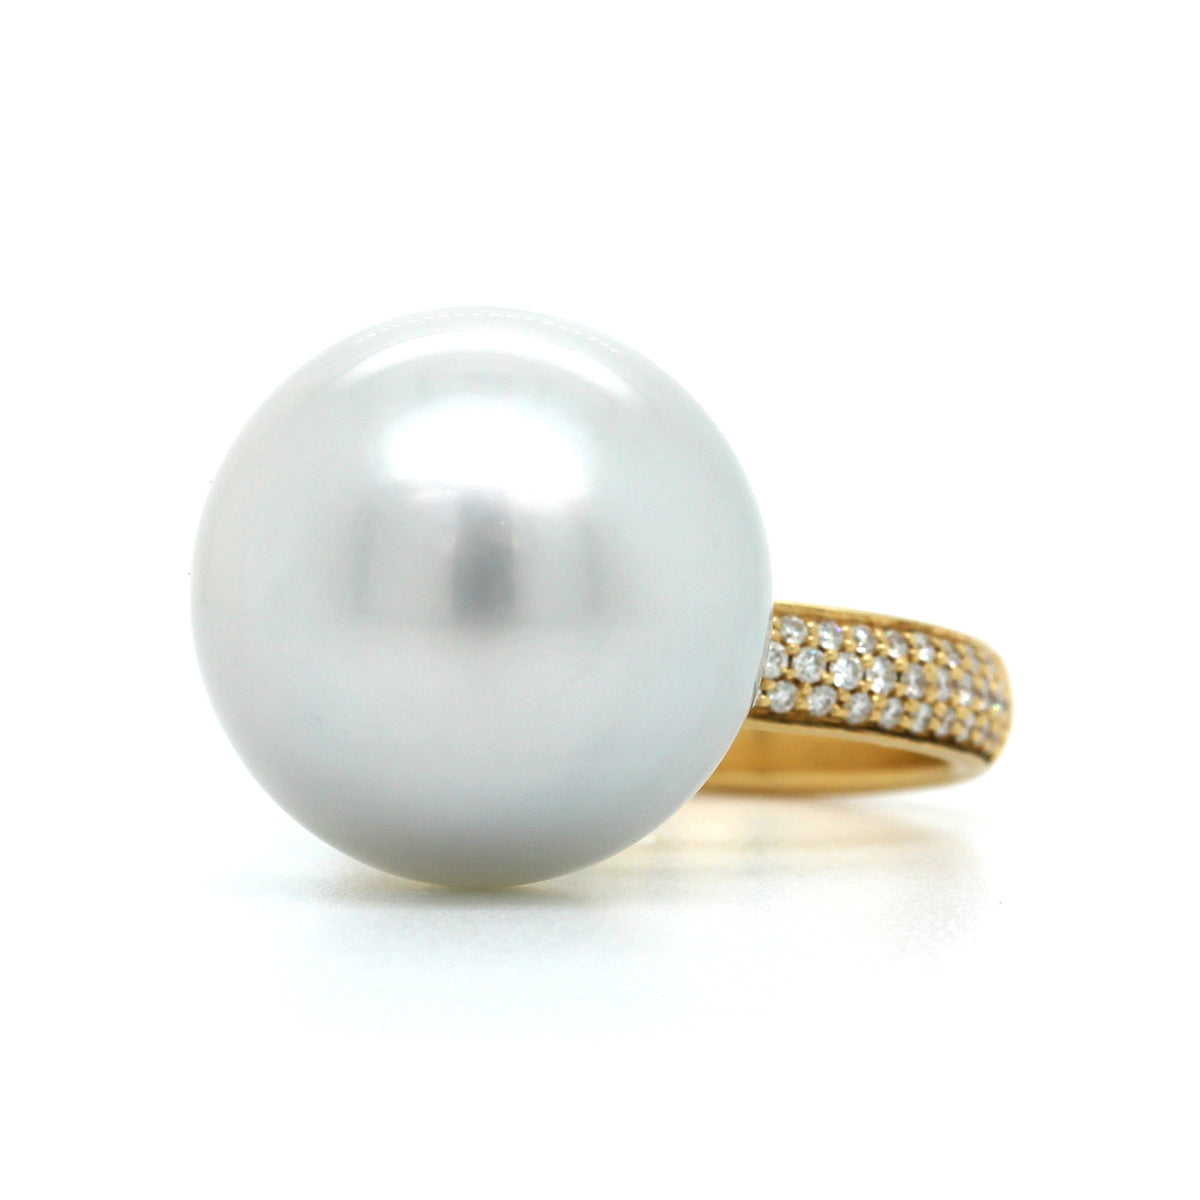 18K Yellow Gold South Sea Pearl Ring